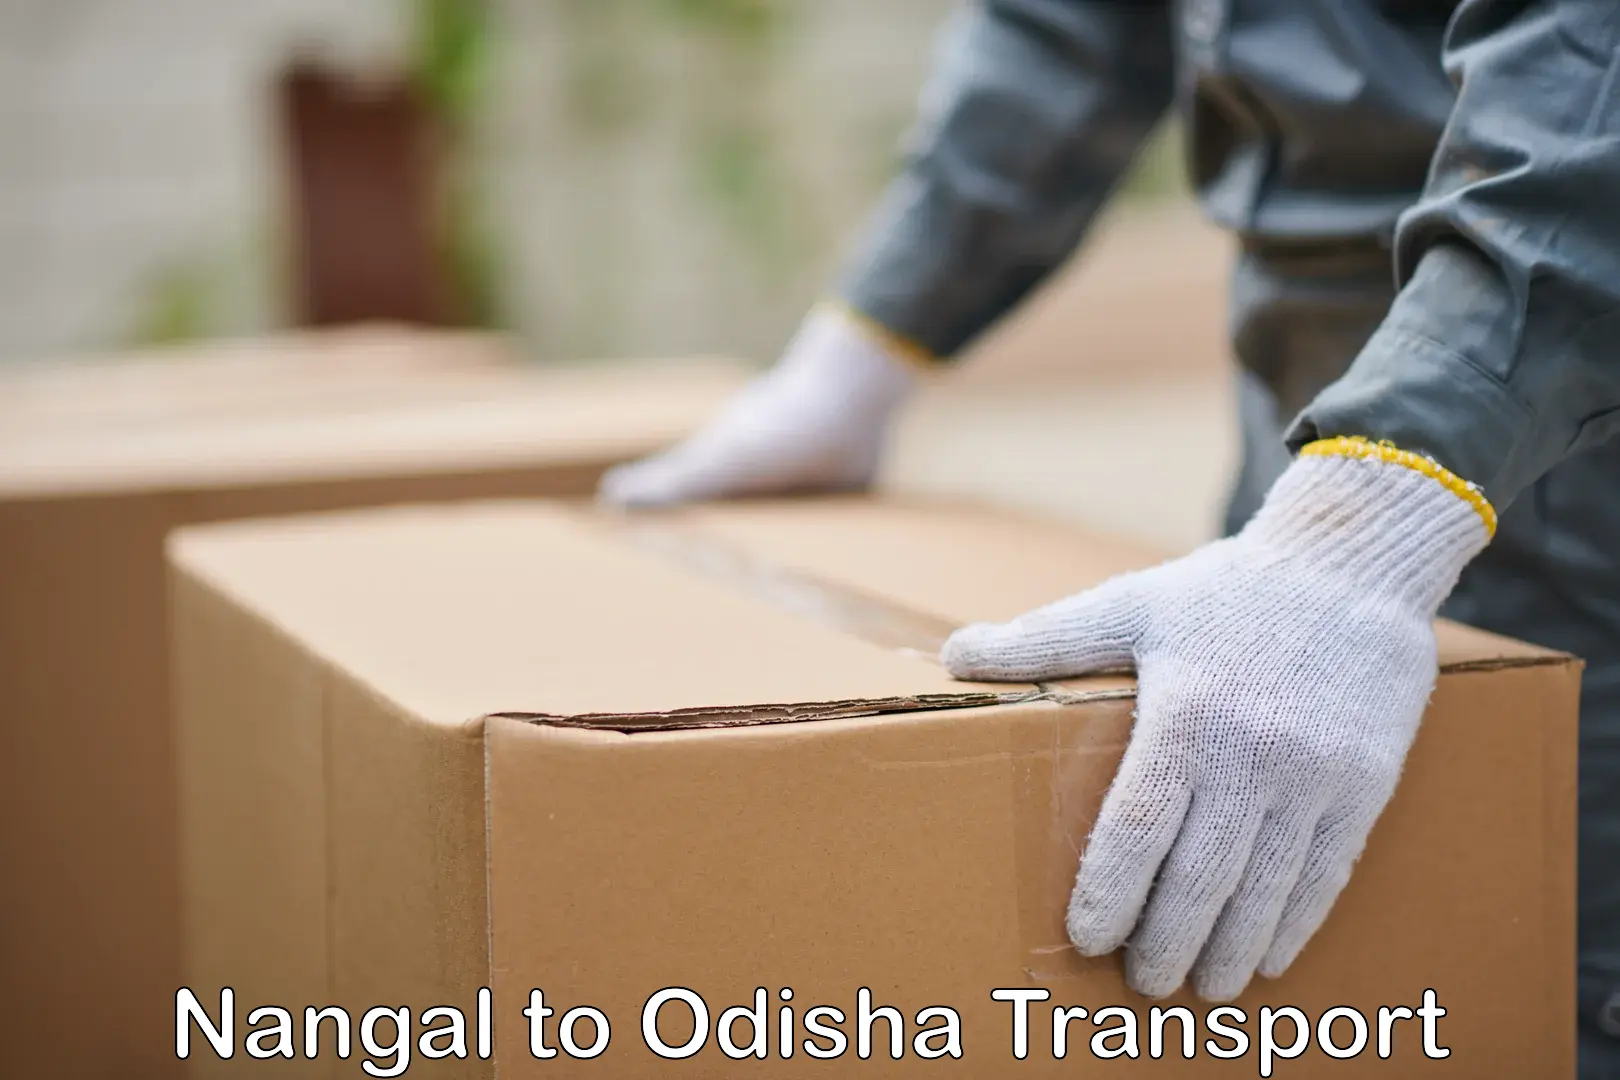 Truck transport companies in India Nangal to Chandipur